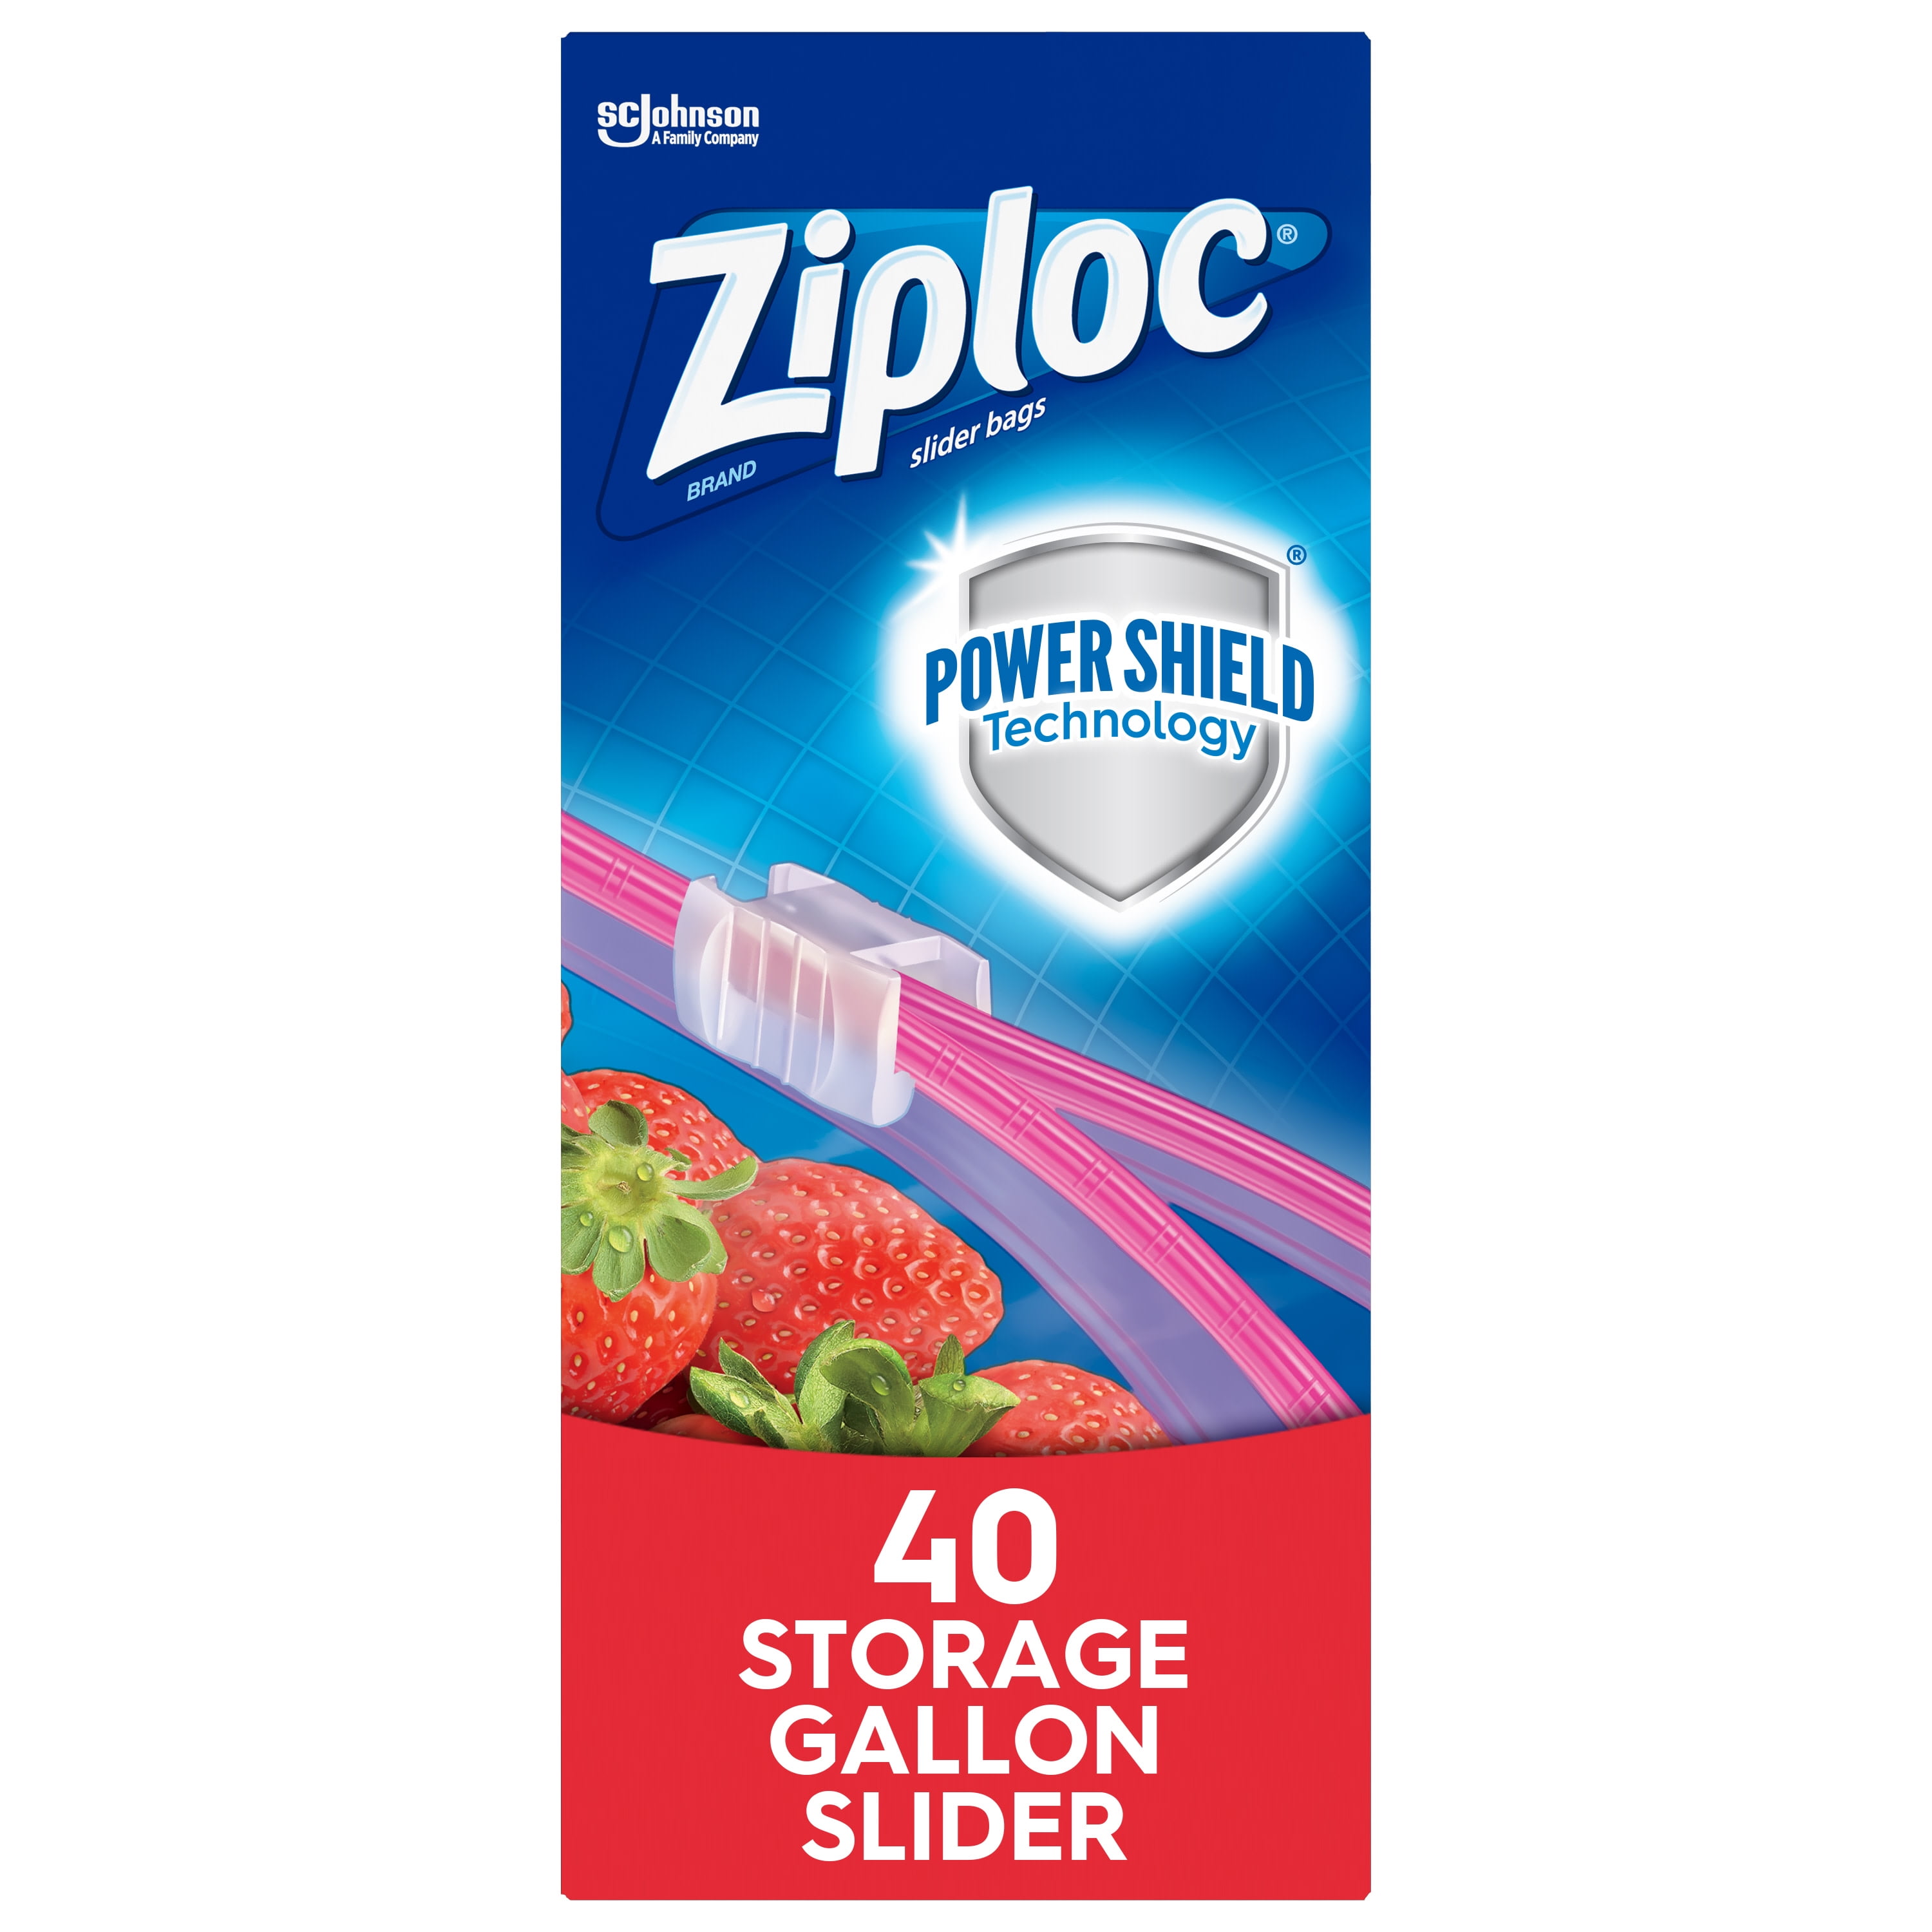 #.40 Count Pack of 1 , Clear Ziploc Brand Slider Storage Gallon Bags with Power Shield Technology,